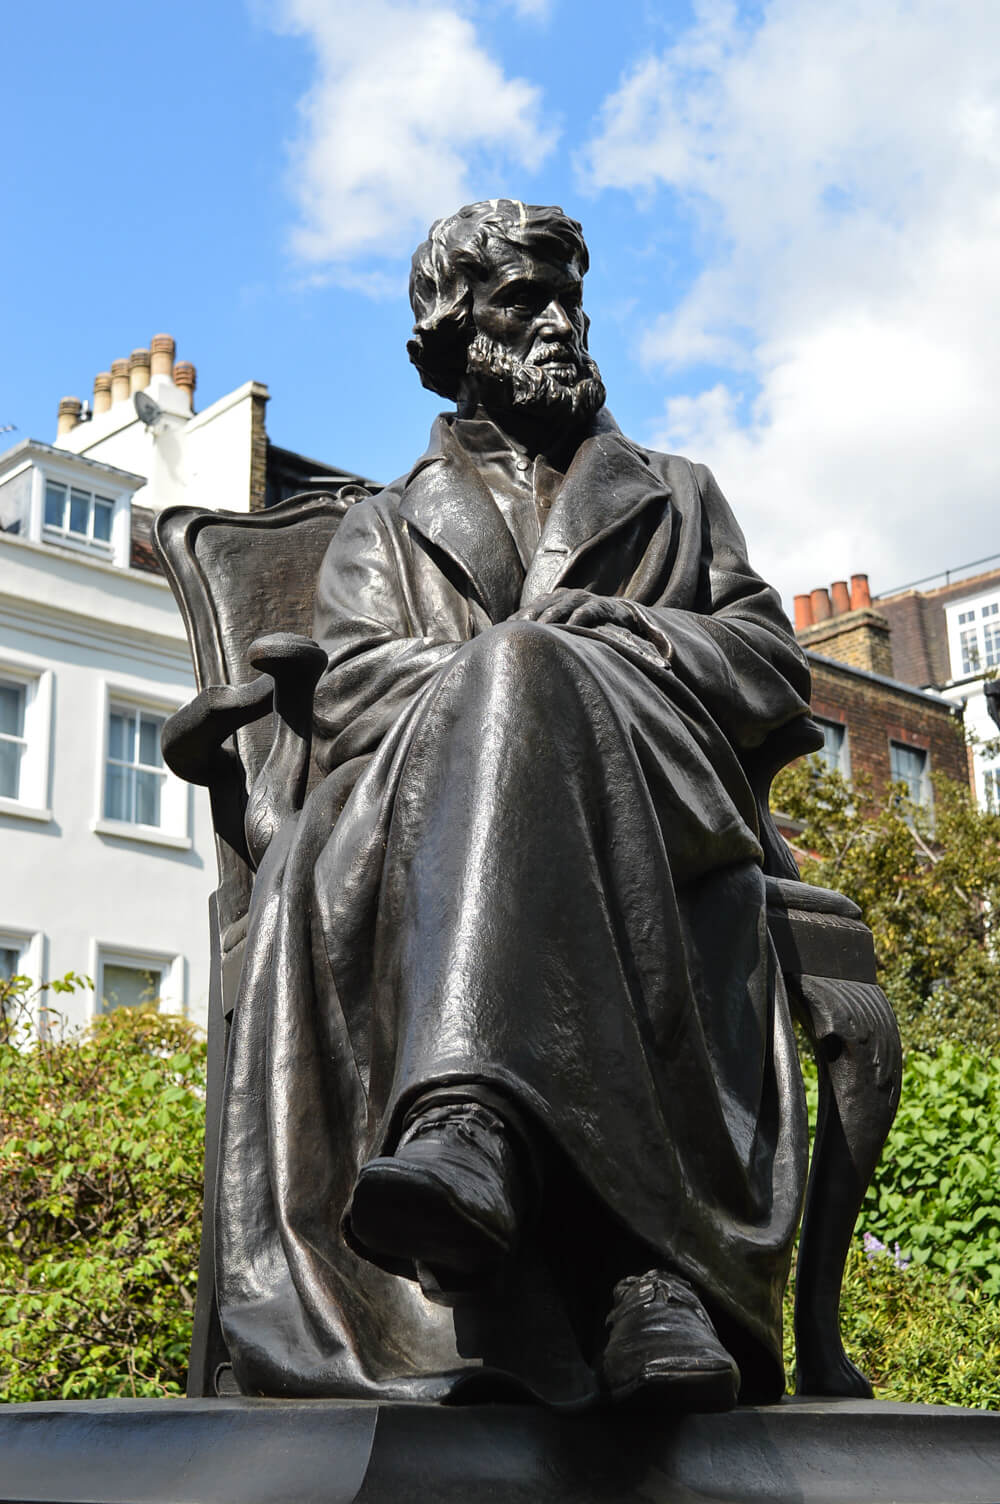 Statue at Carlyle's House, Chelsea, London